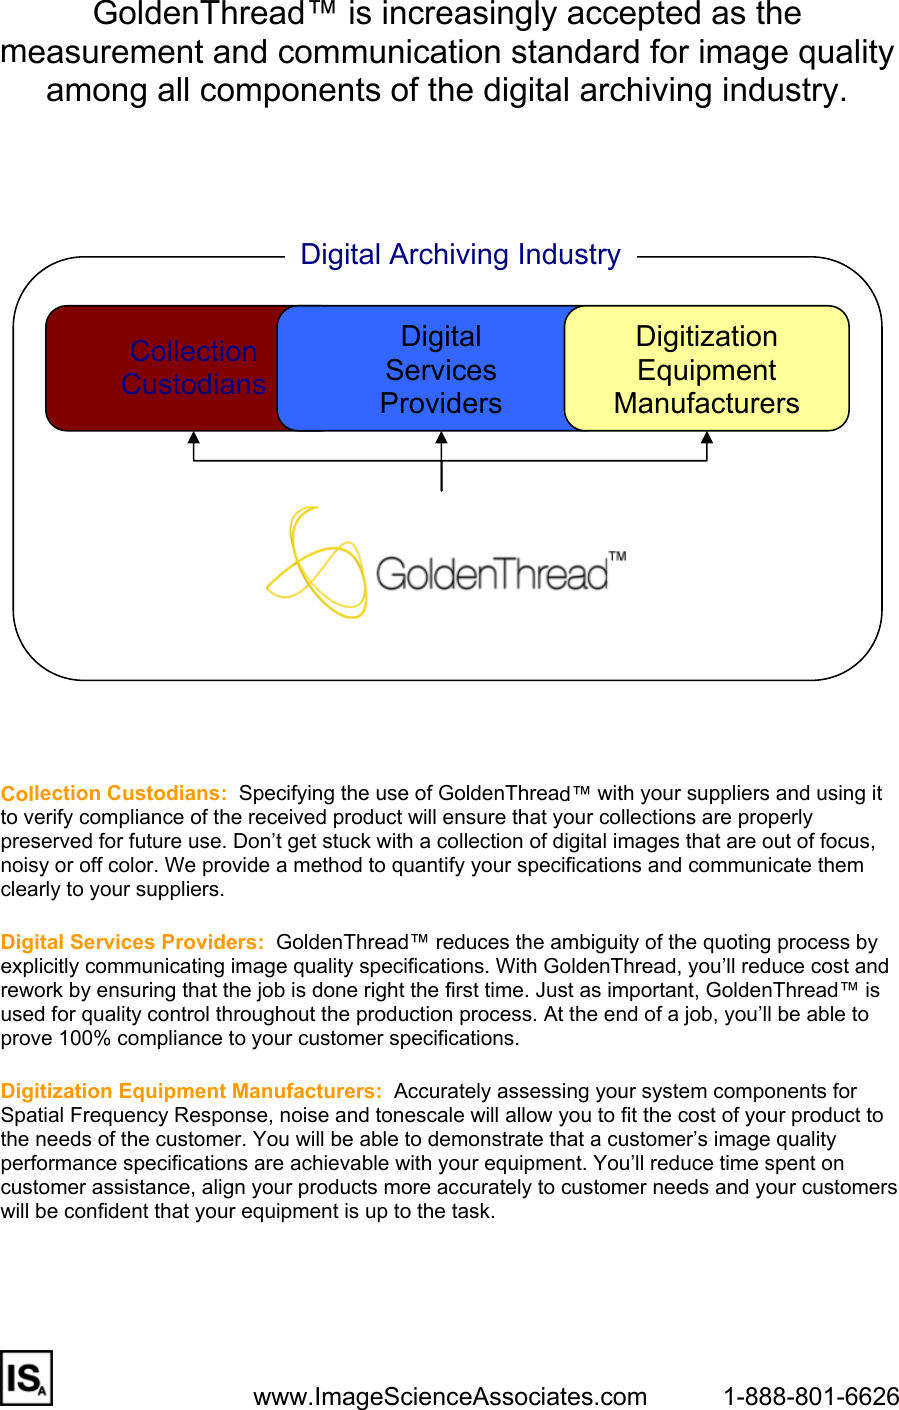 Page 4 of 12 - Golden Thread Users Manual